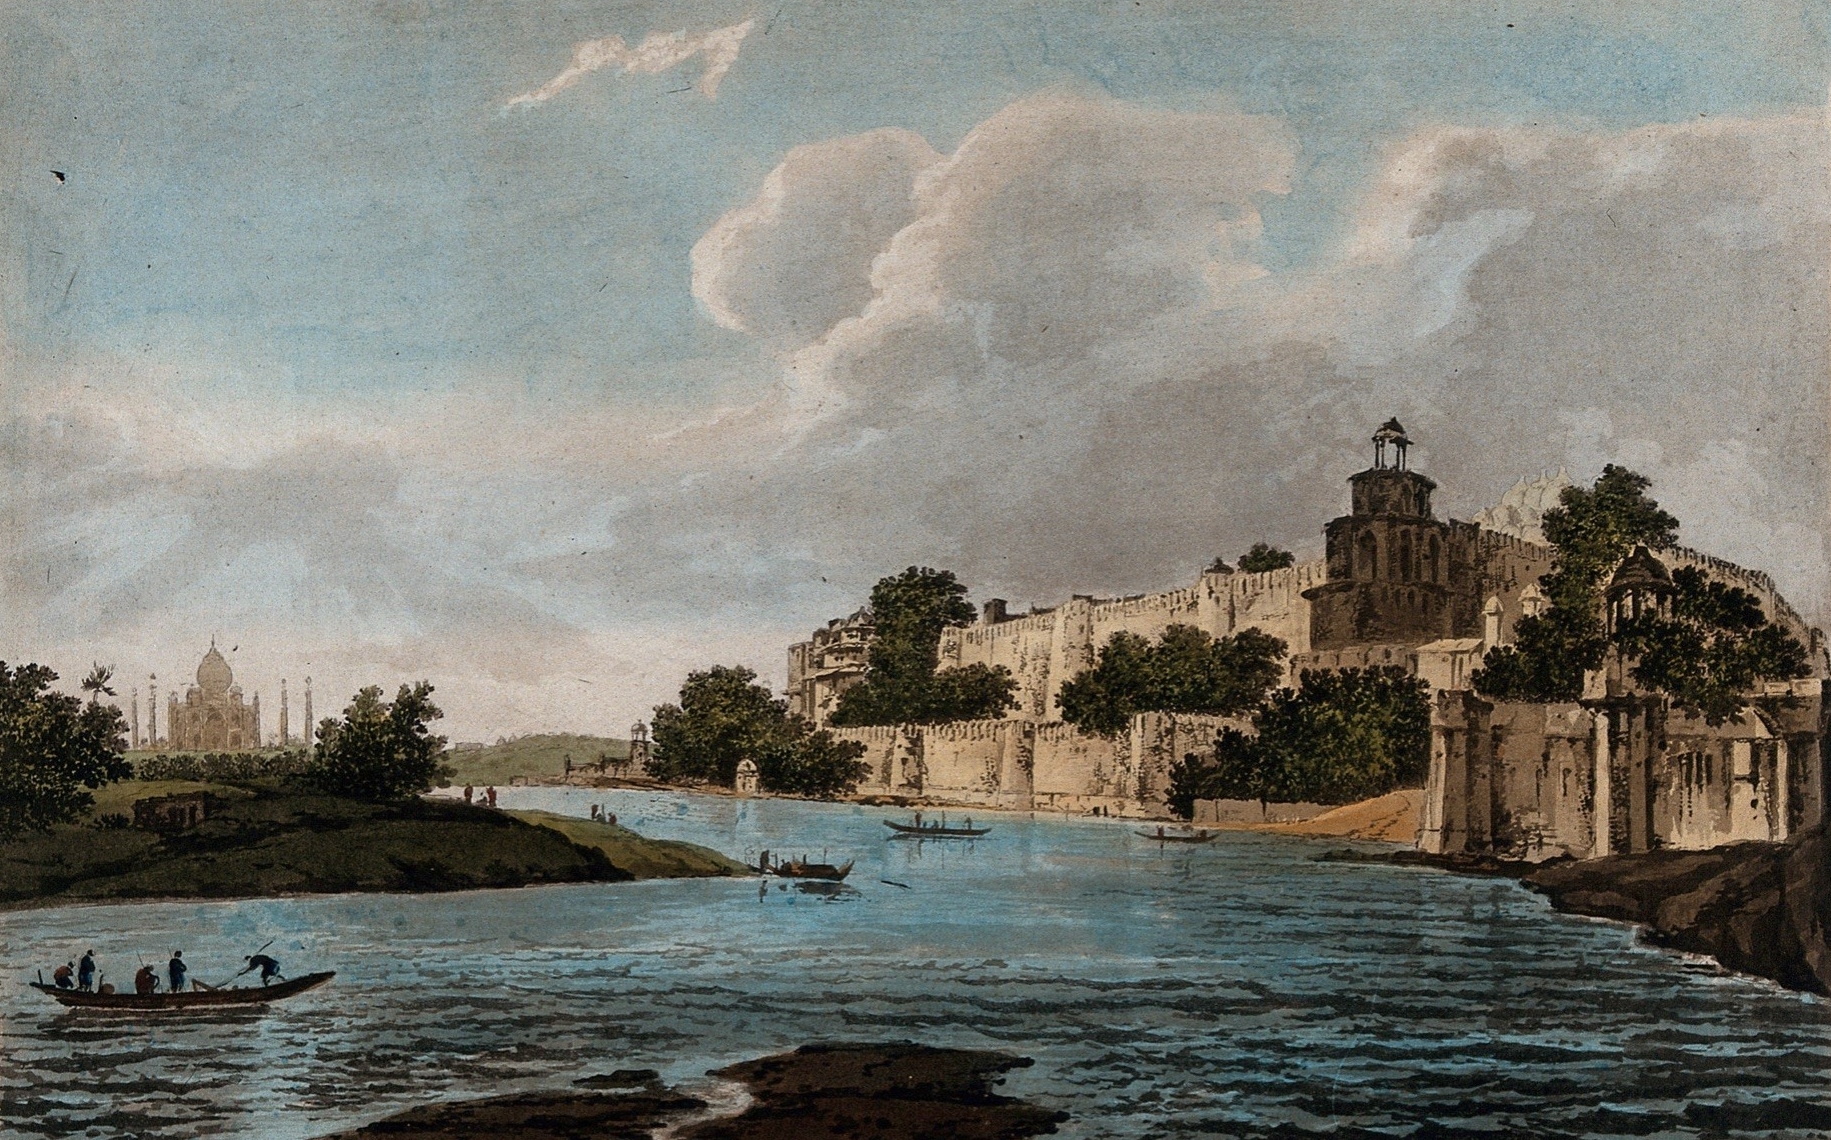 A painting of the Agra Fort by the river Yamuna, William Hodges, 1786 CE. Image Source: Wikimedia Commons